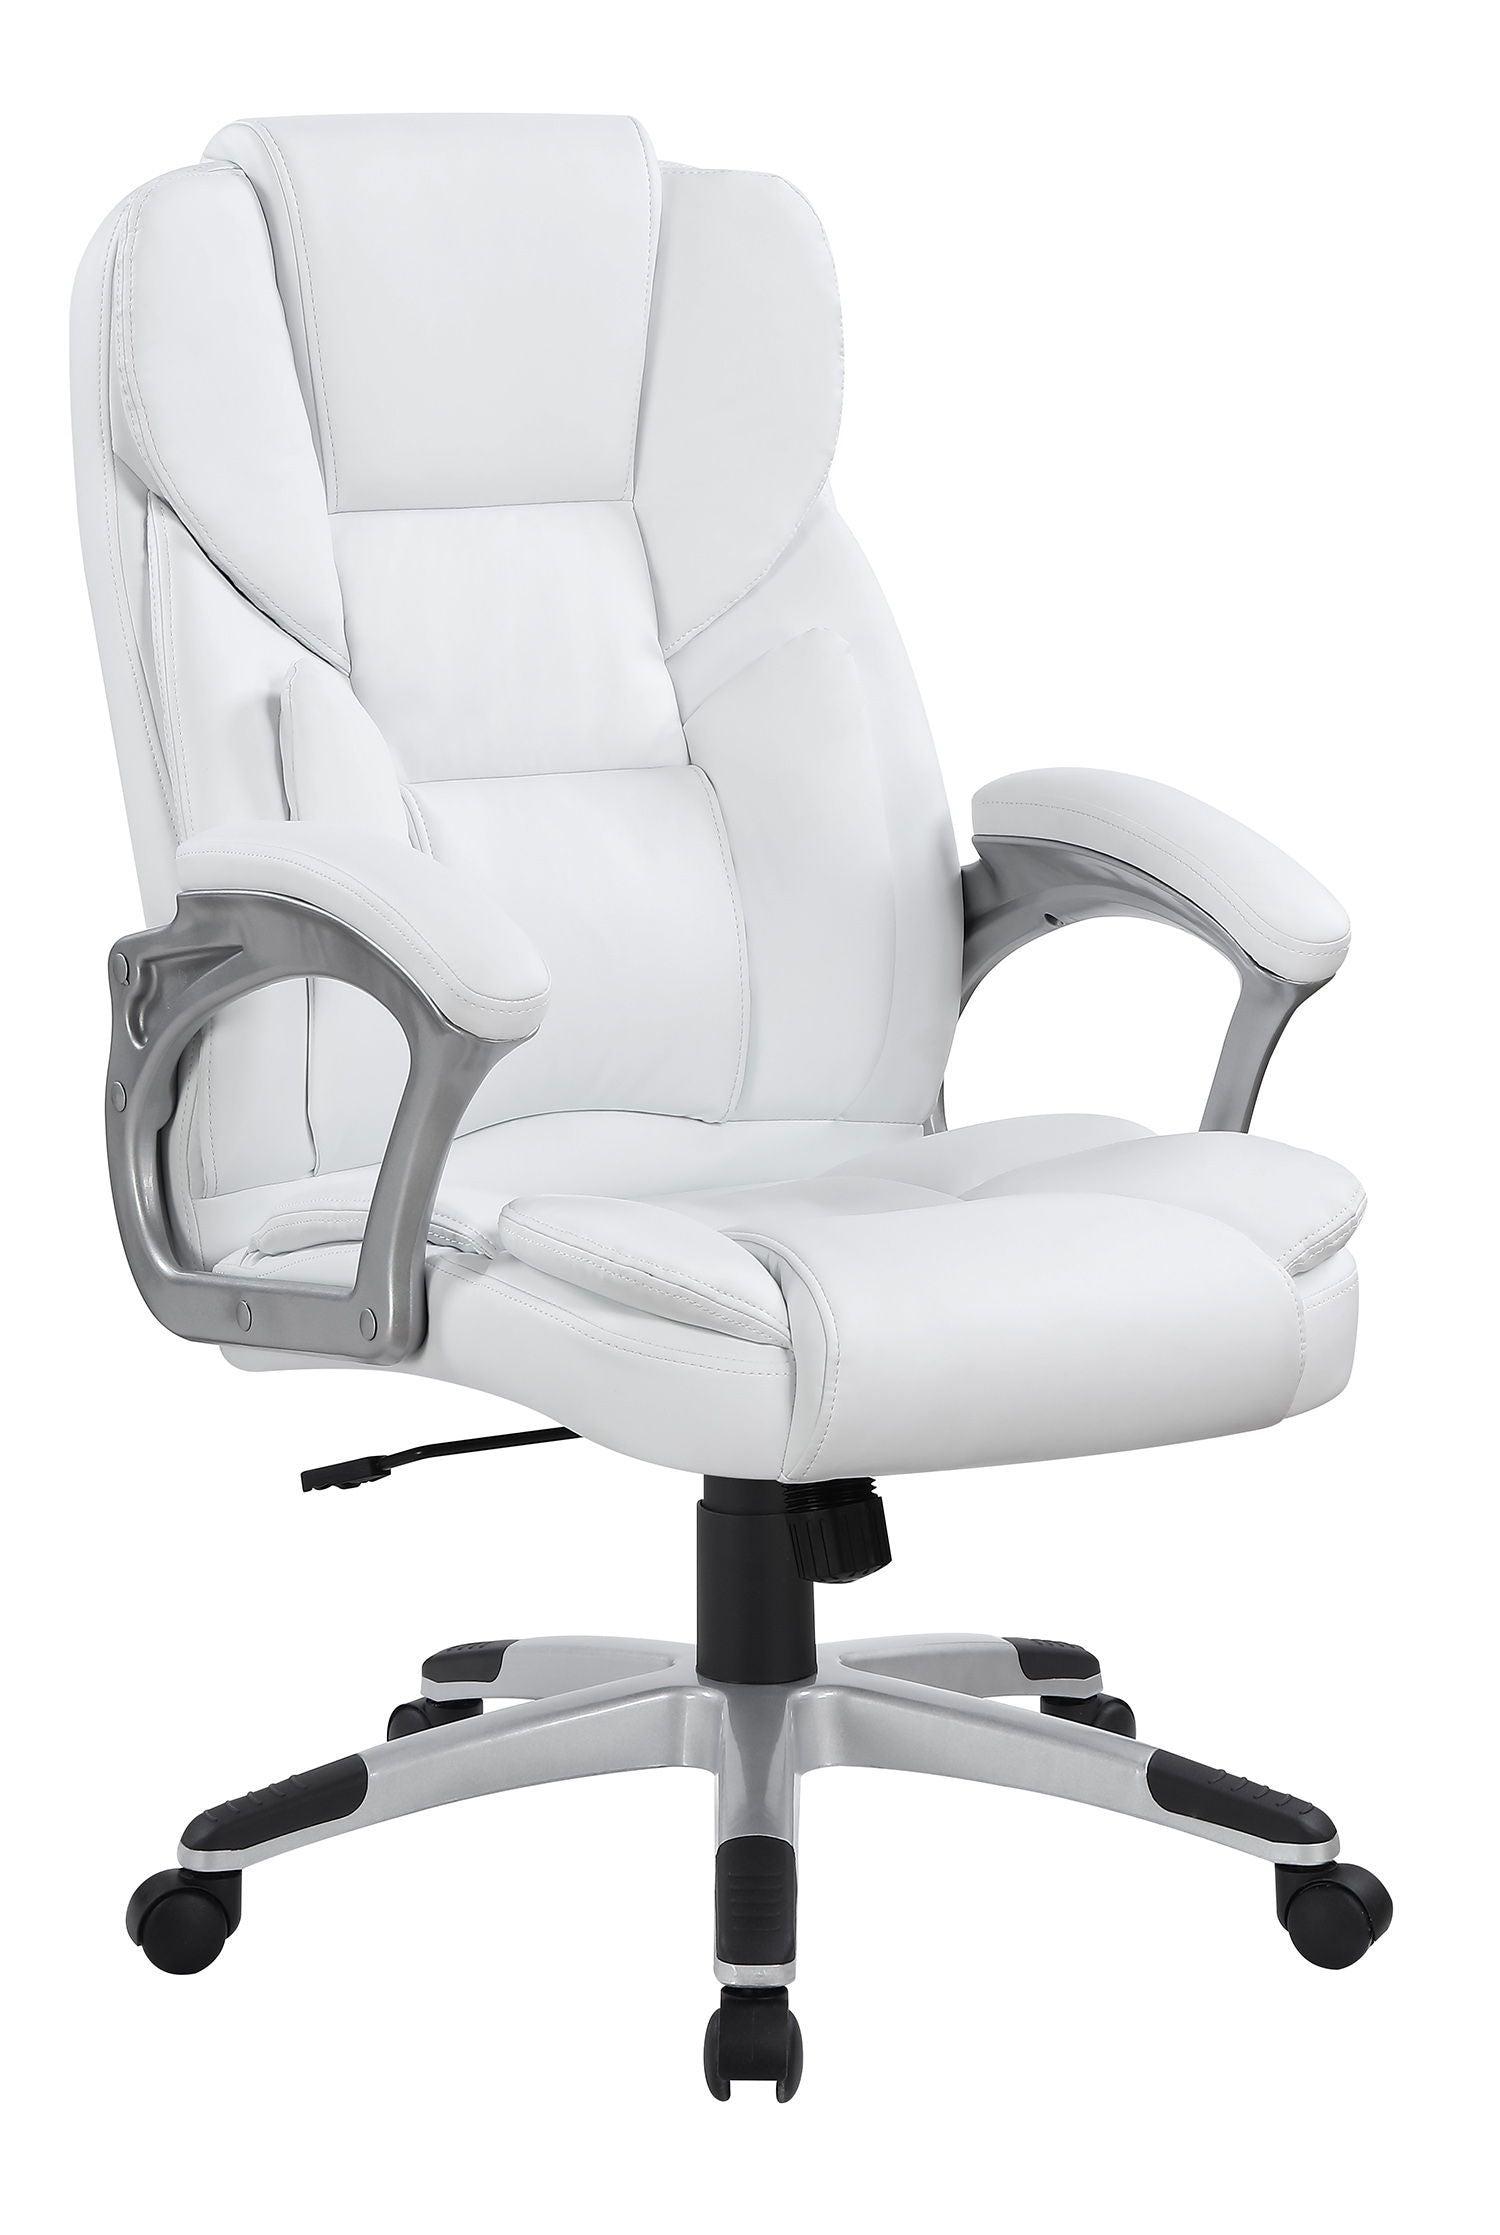 Adjustable Height Office Chair - White And Silver